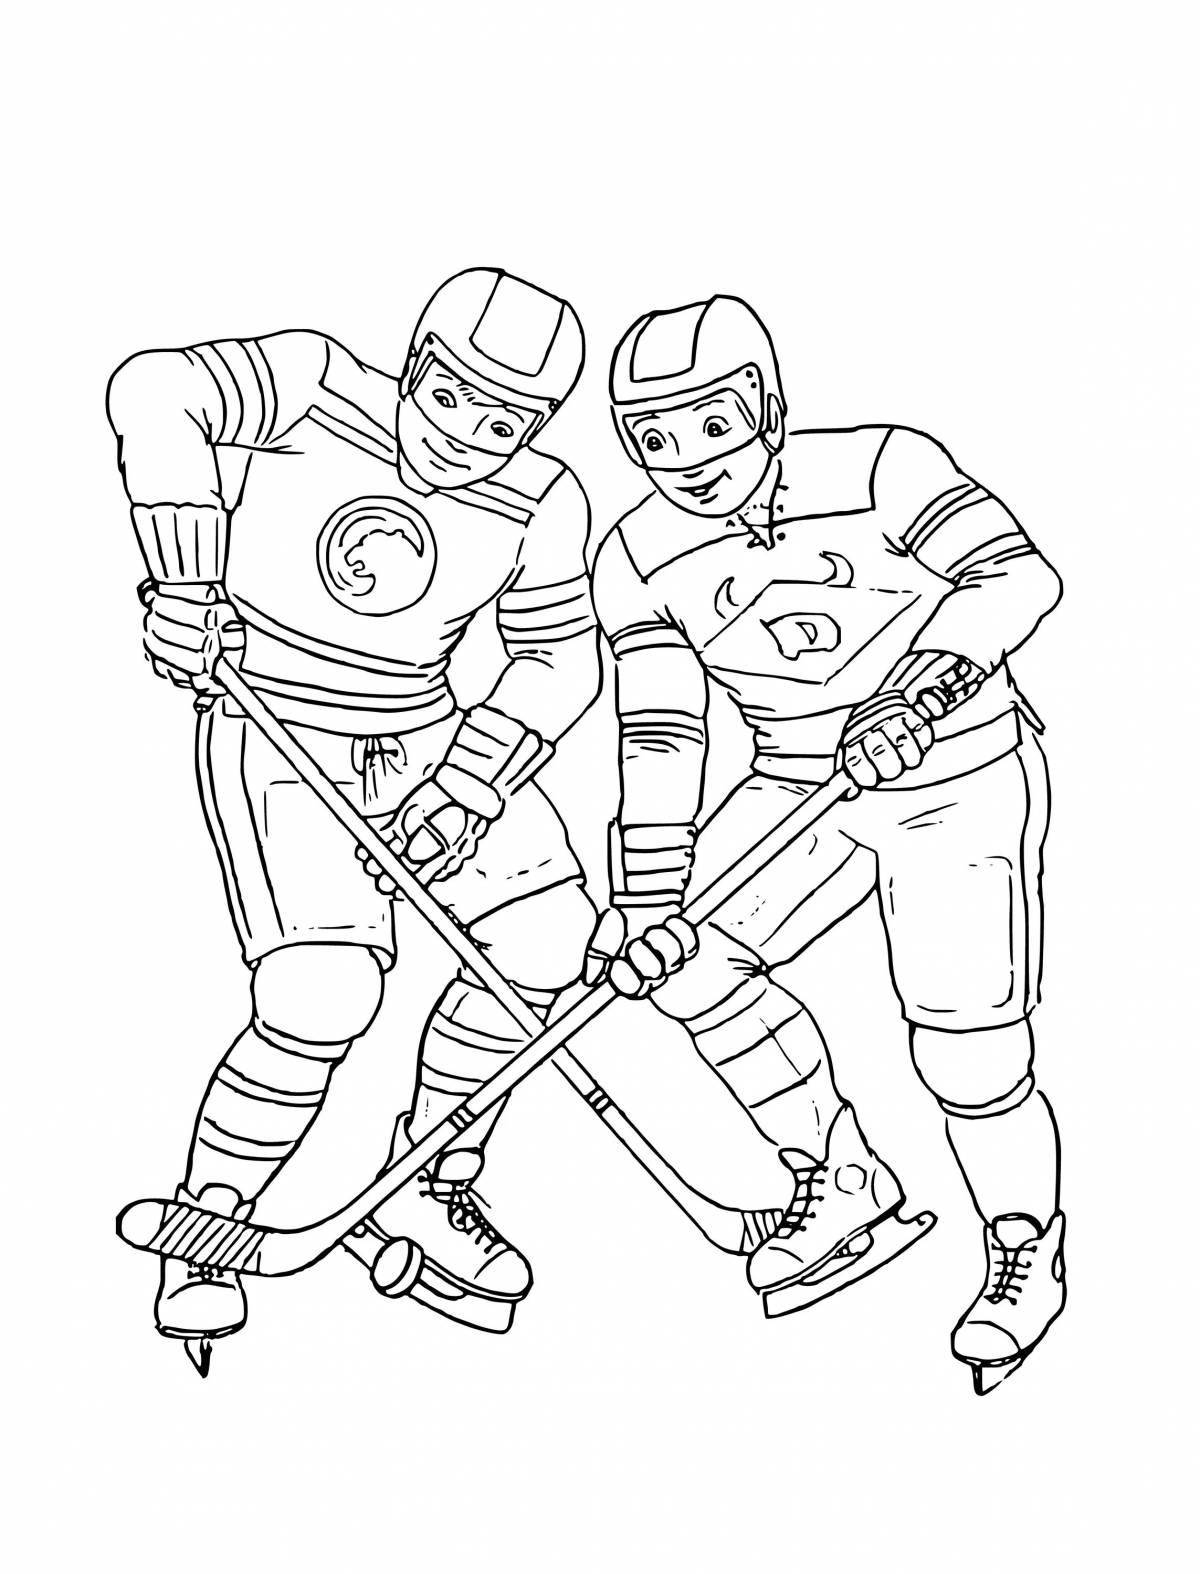 Great hockey coloring book voice book